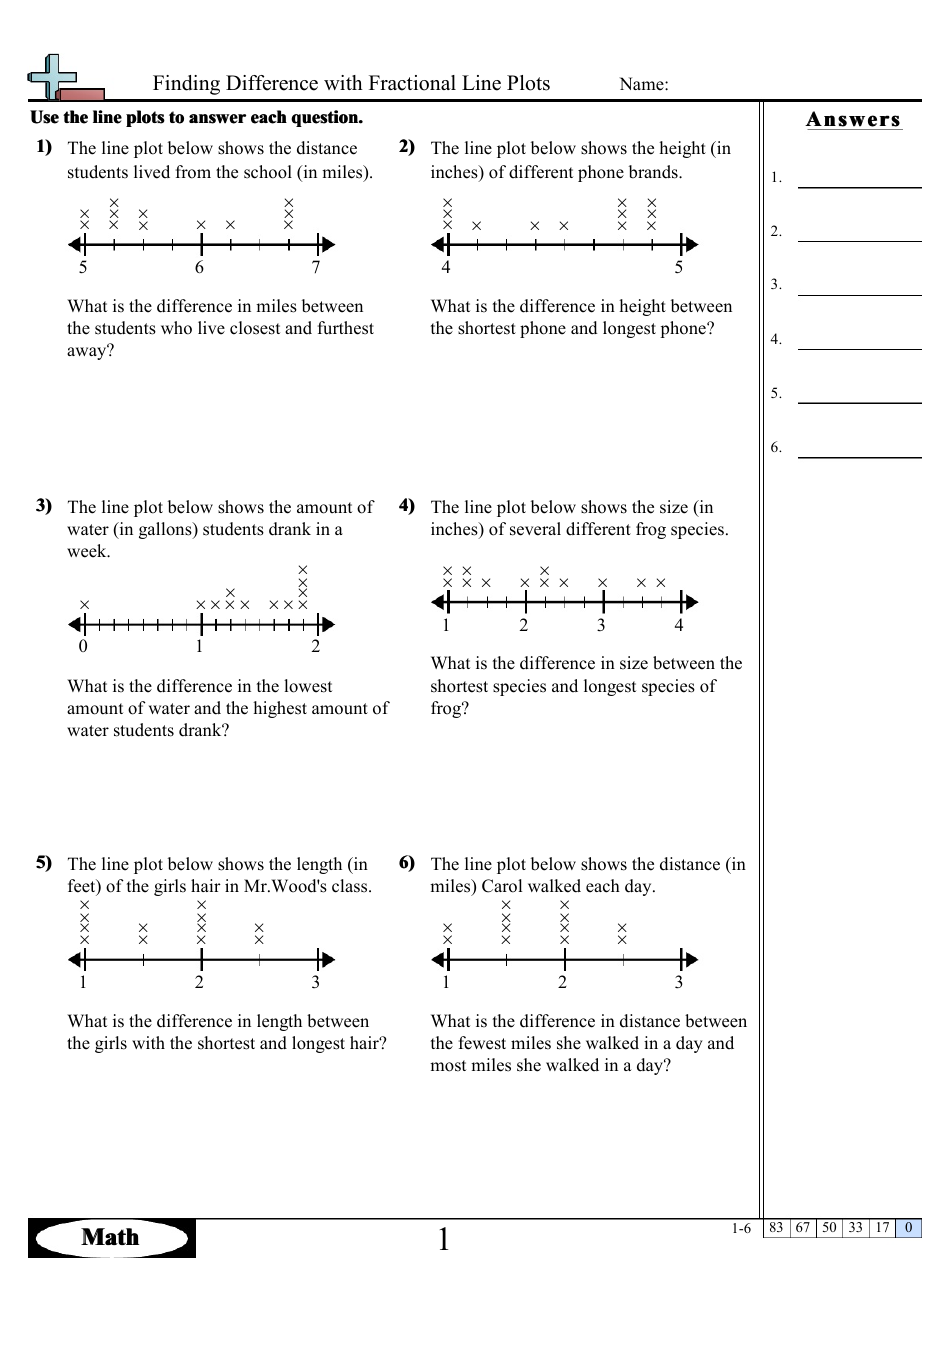 Finding Difference With Fractional Line Plots Worksheets With Within Line Plots With Fractions Worksheet